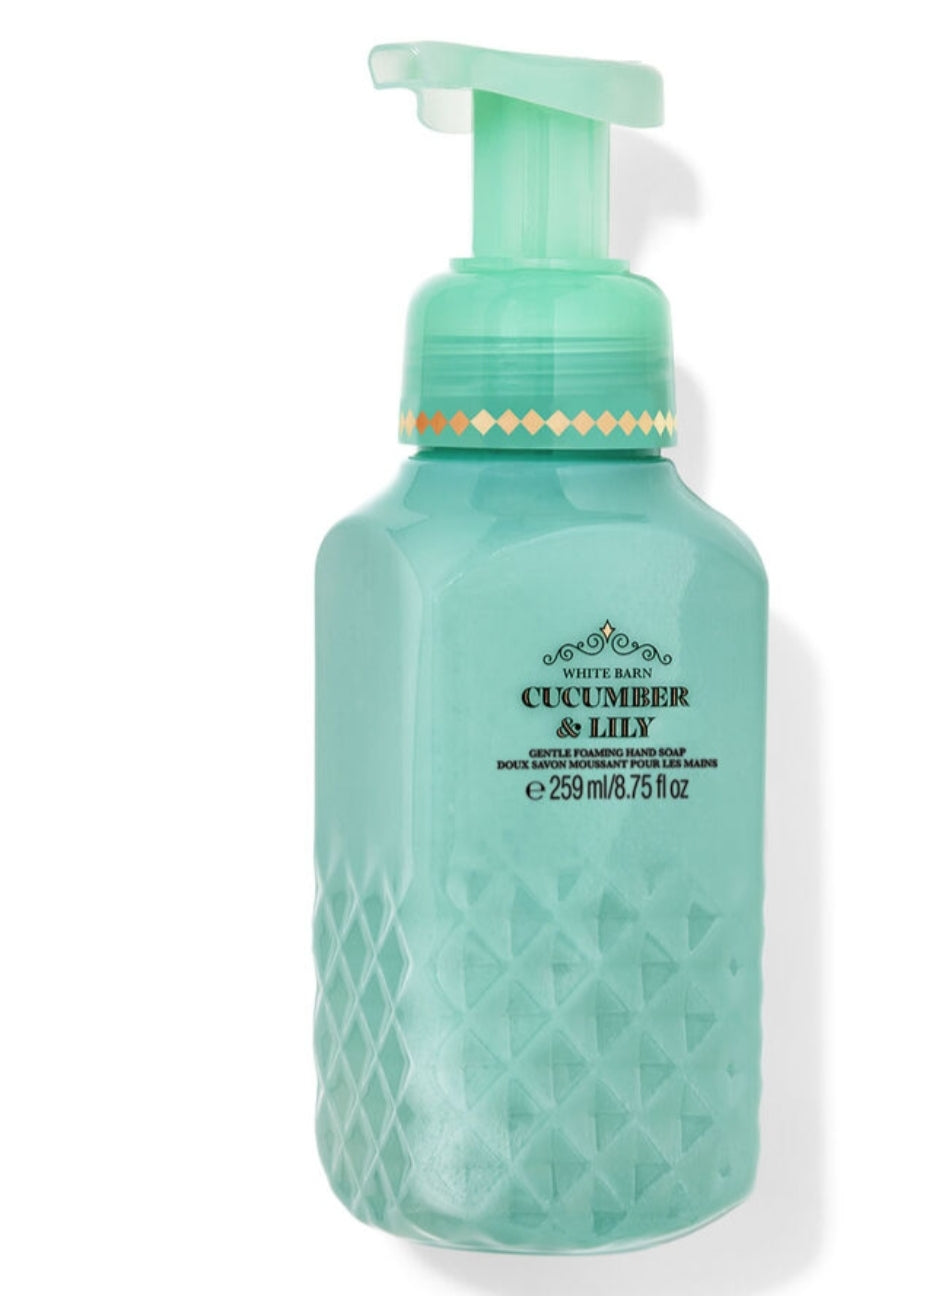 Cucumber & Lily Gentle Foaming Hand Wash